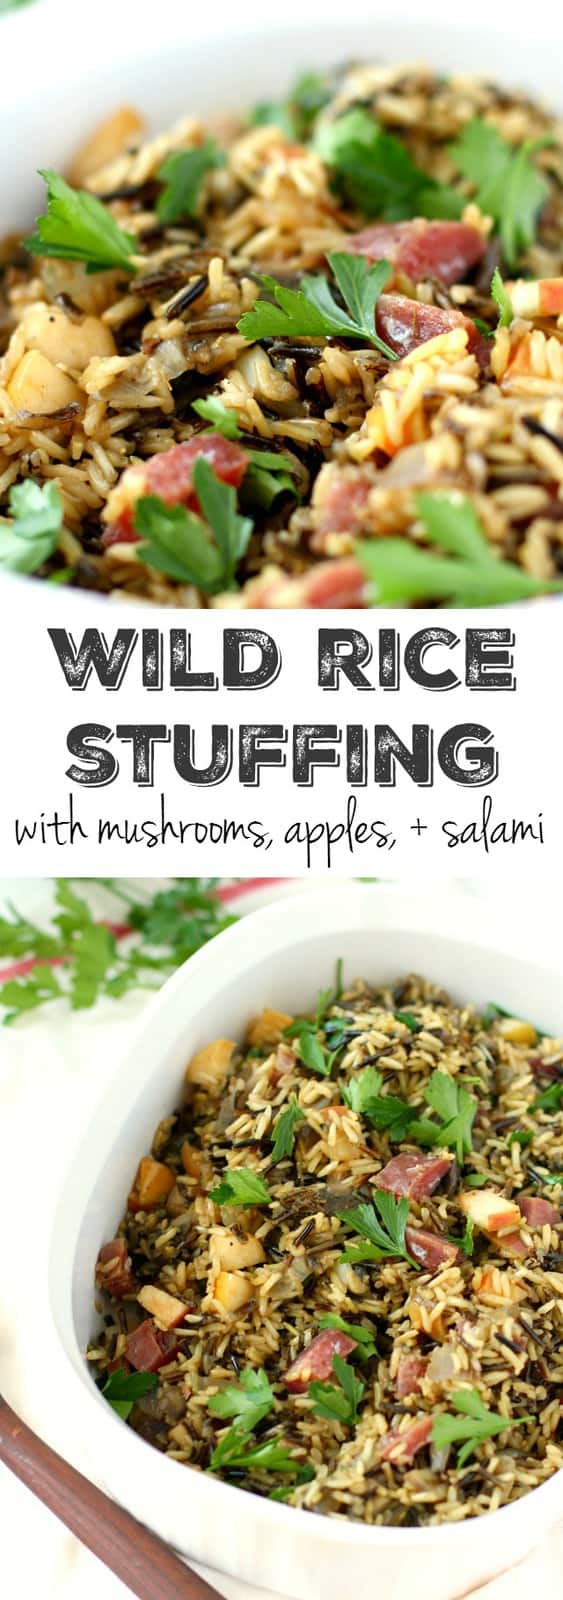 A delicious addition to the Thanksgiving table...gluten free wild rice stuffing with mushrooms, onions, apples, and salami. #glutenfree #shop AD